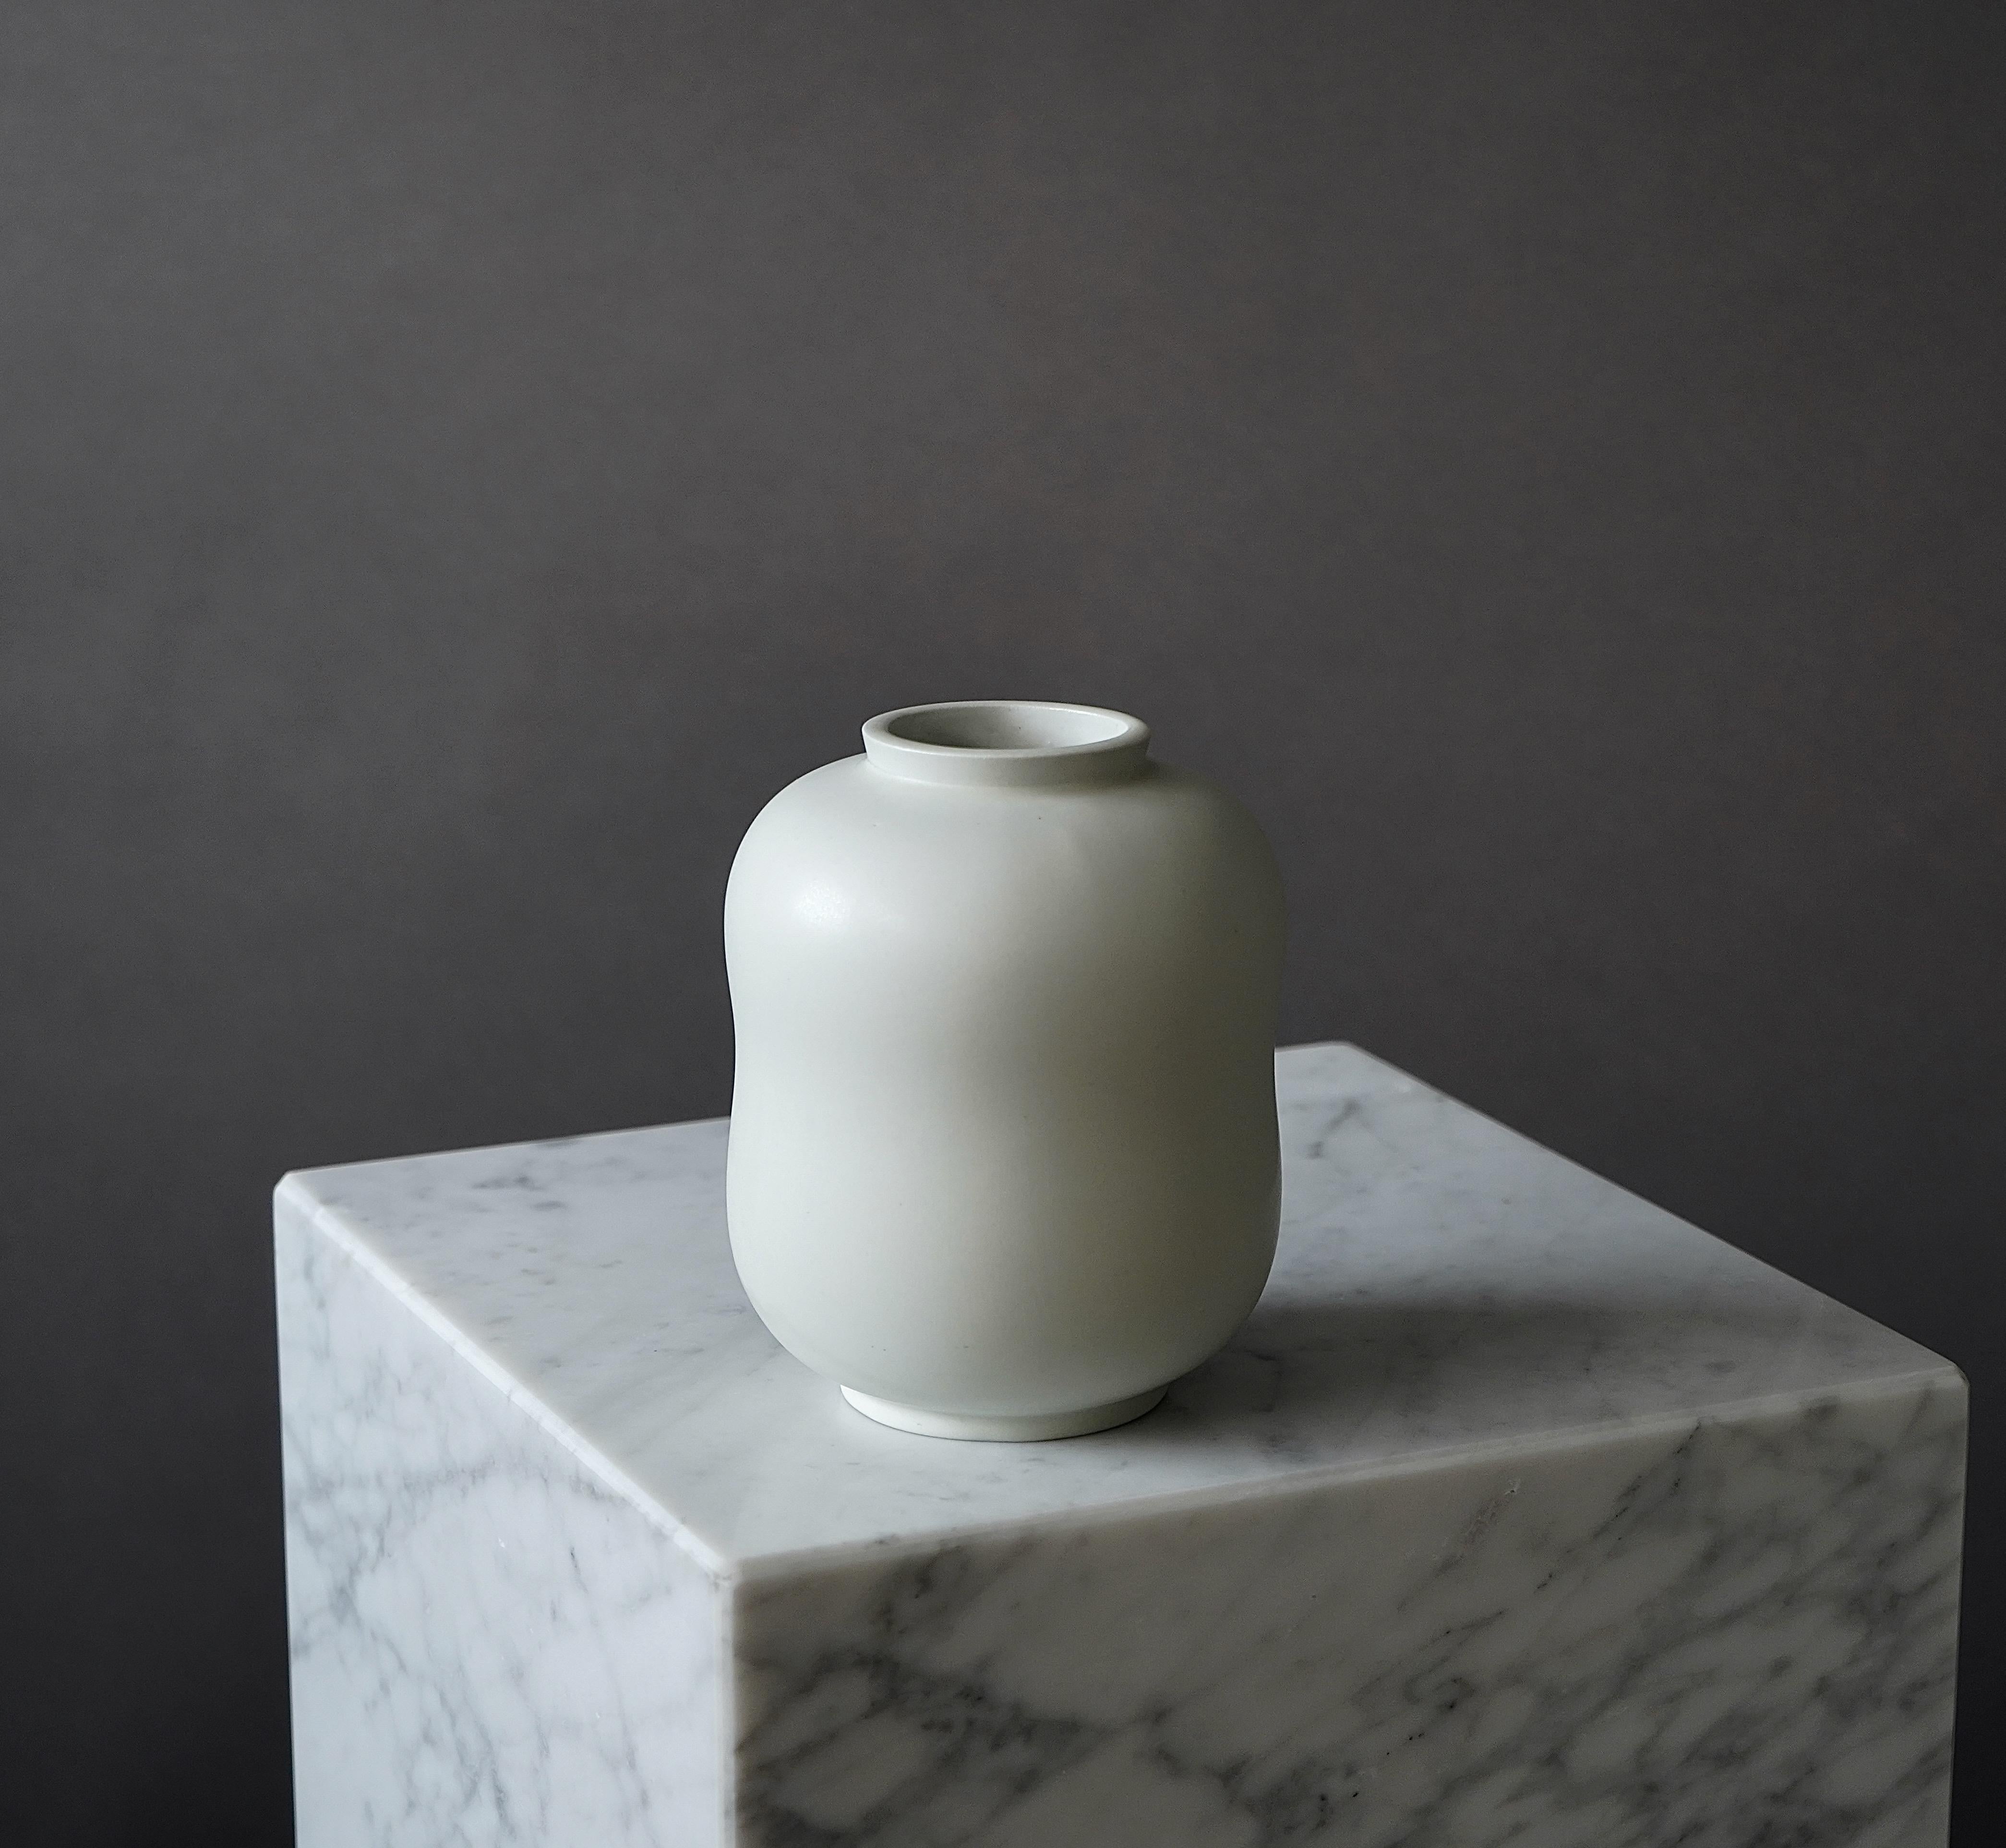 A beautiful 'Swedish Modern' stoneware vase with 'Carrara' glaze.
Made by Wilhelm Kåge at Gustavsberg in Sweden, 1930s. 

Great condition. 
Stamped 'Gustavsberg / CARRARA'.

Wilhelm Kåge was a Swedish artist, painter, and ceramicist. Between 1917